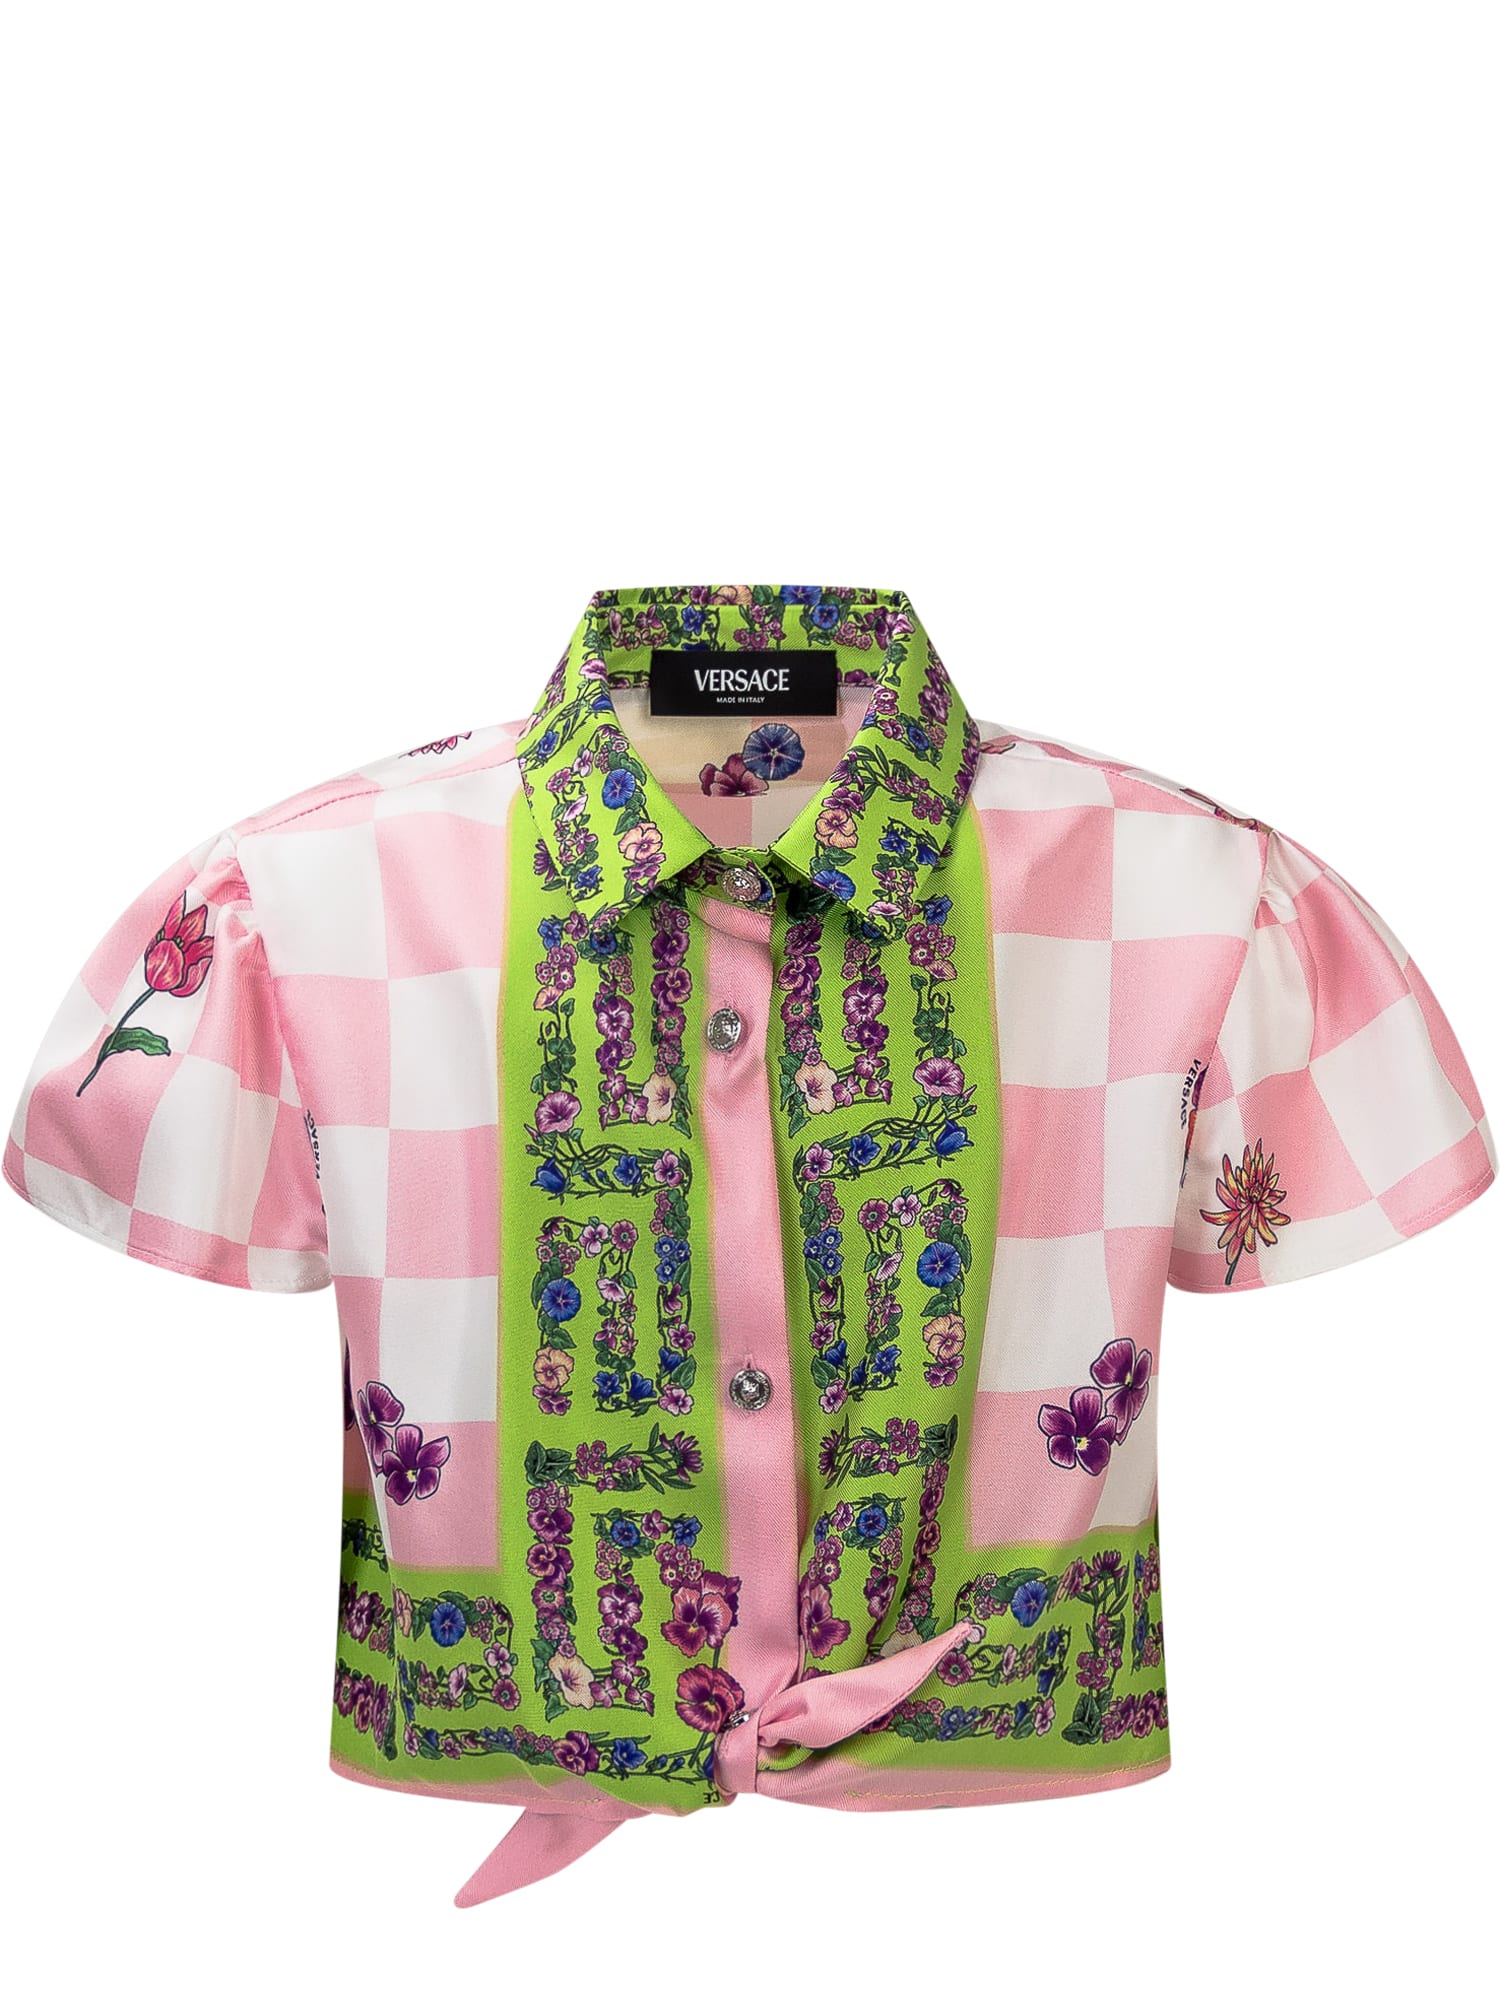 Versace Kids' Blossom Shirt In Multicolore